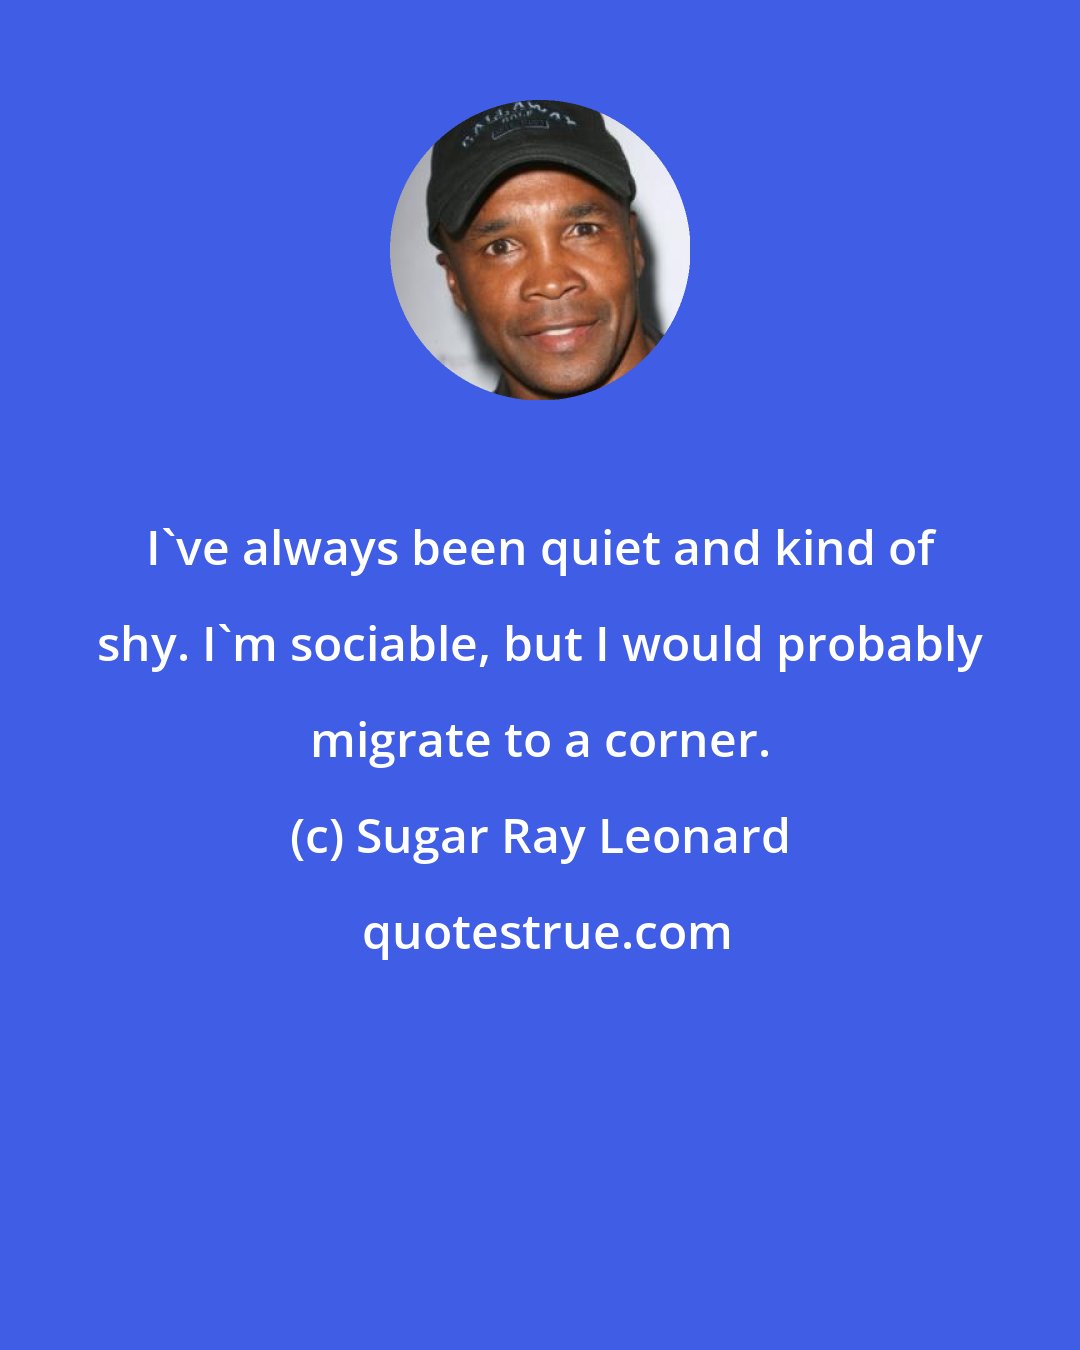 Sugar Ray Leonard: I've always been quiet and kind of shy. I'm sociable, but I would probably migrate to a corner.